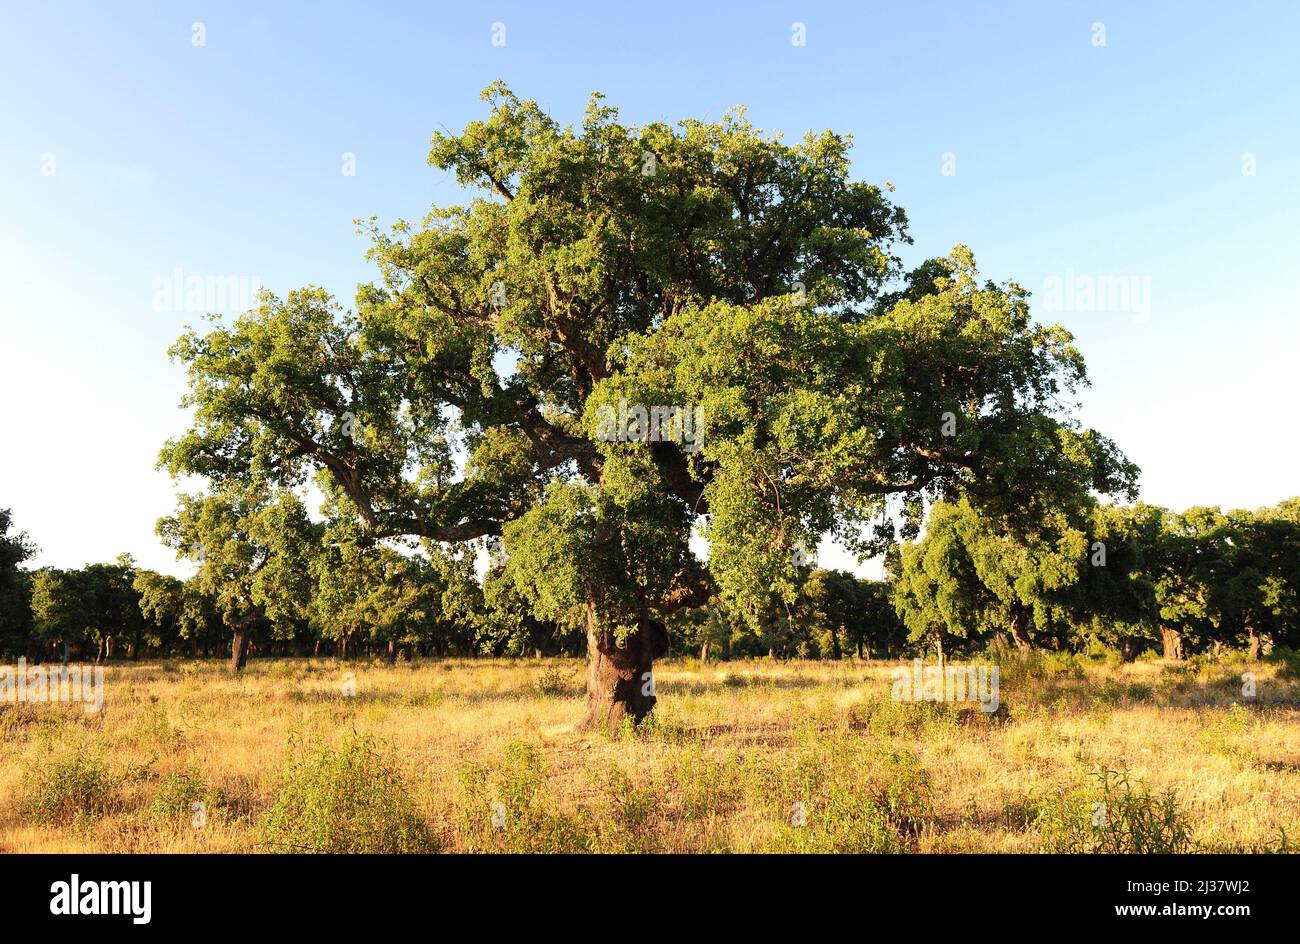 Cork oak (Quercus suber) is a evergreen tree native to western Mediterranean basin. Its bark is used to make stoppers, in decoration and as Stock Photo